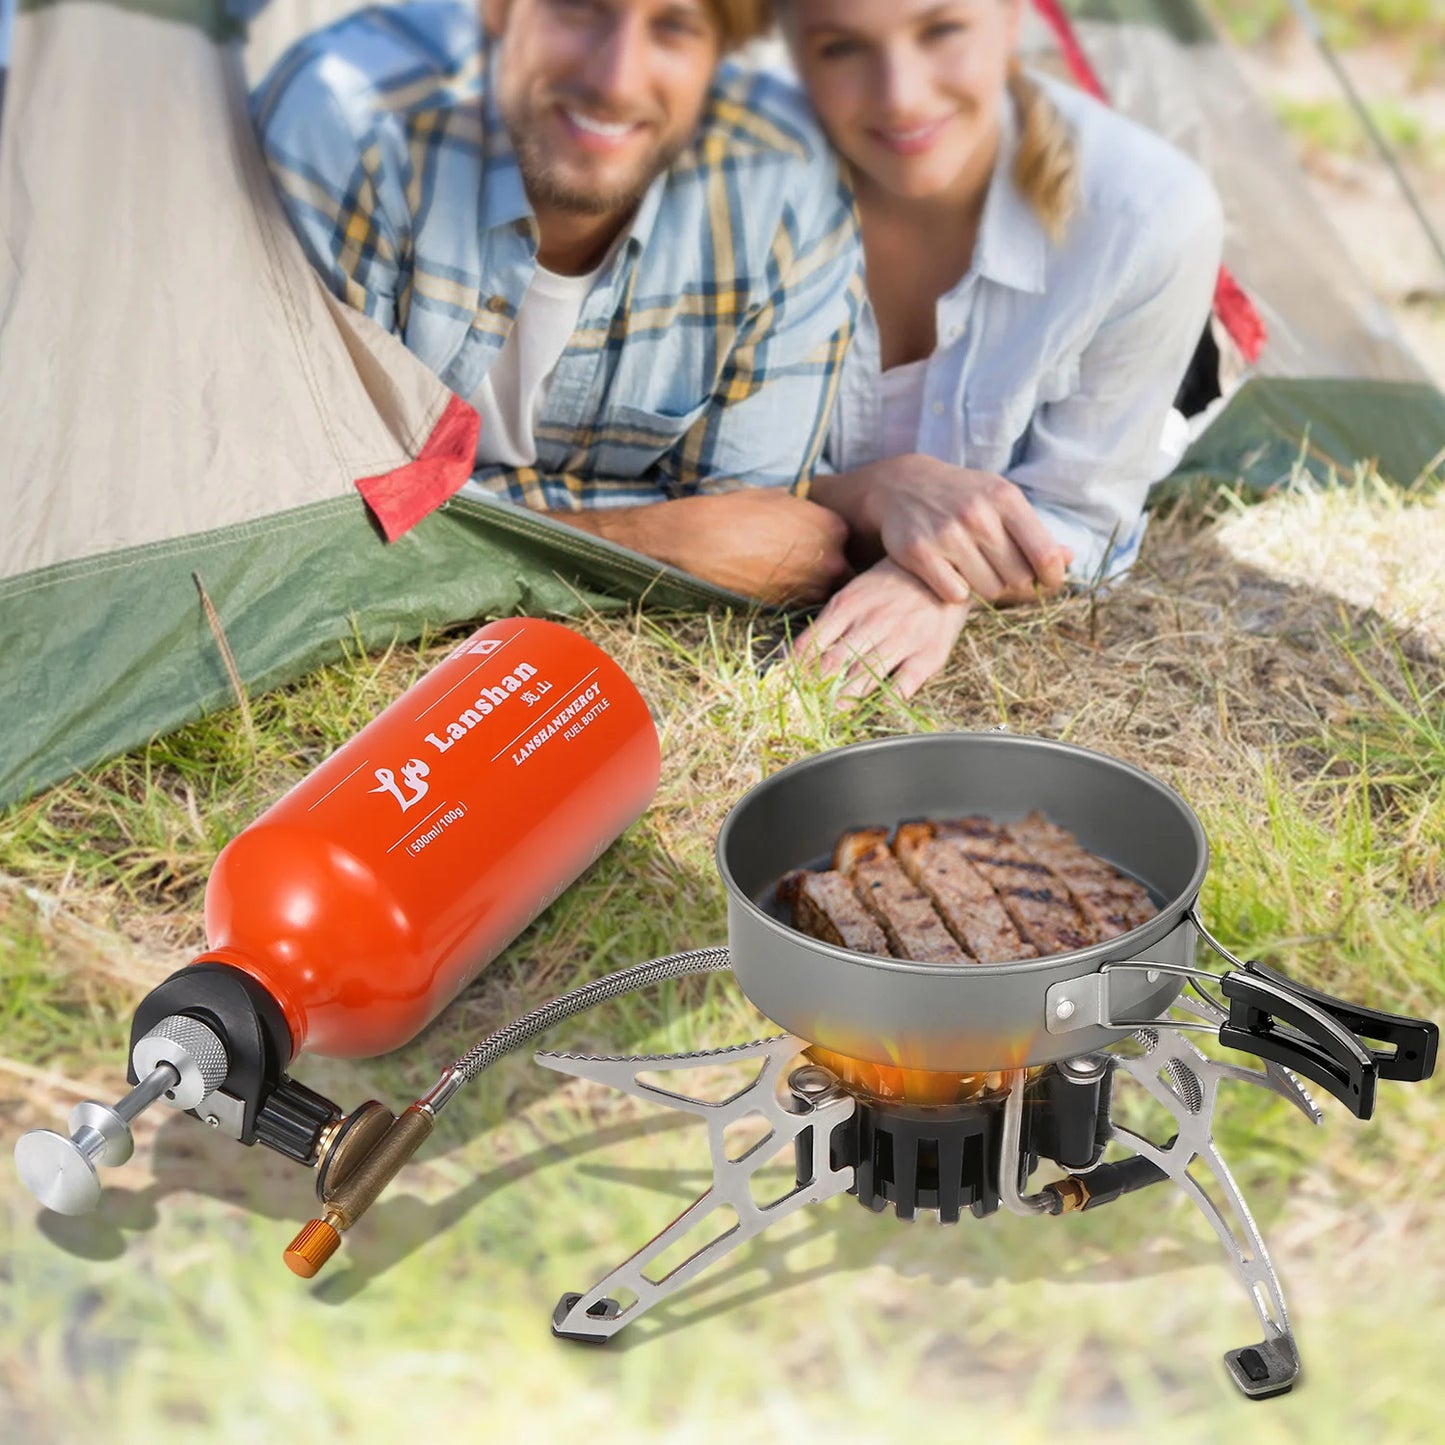 Camping Multi Fuel Stove Preheating Oil/Gas Outdoor Camping Stove Cooker